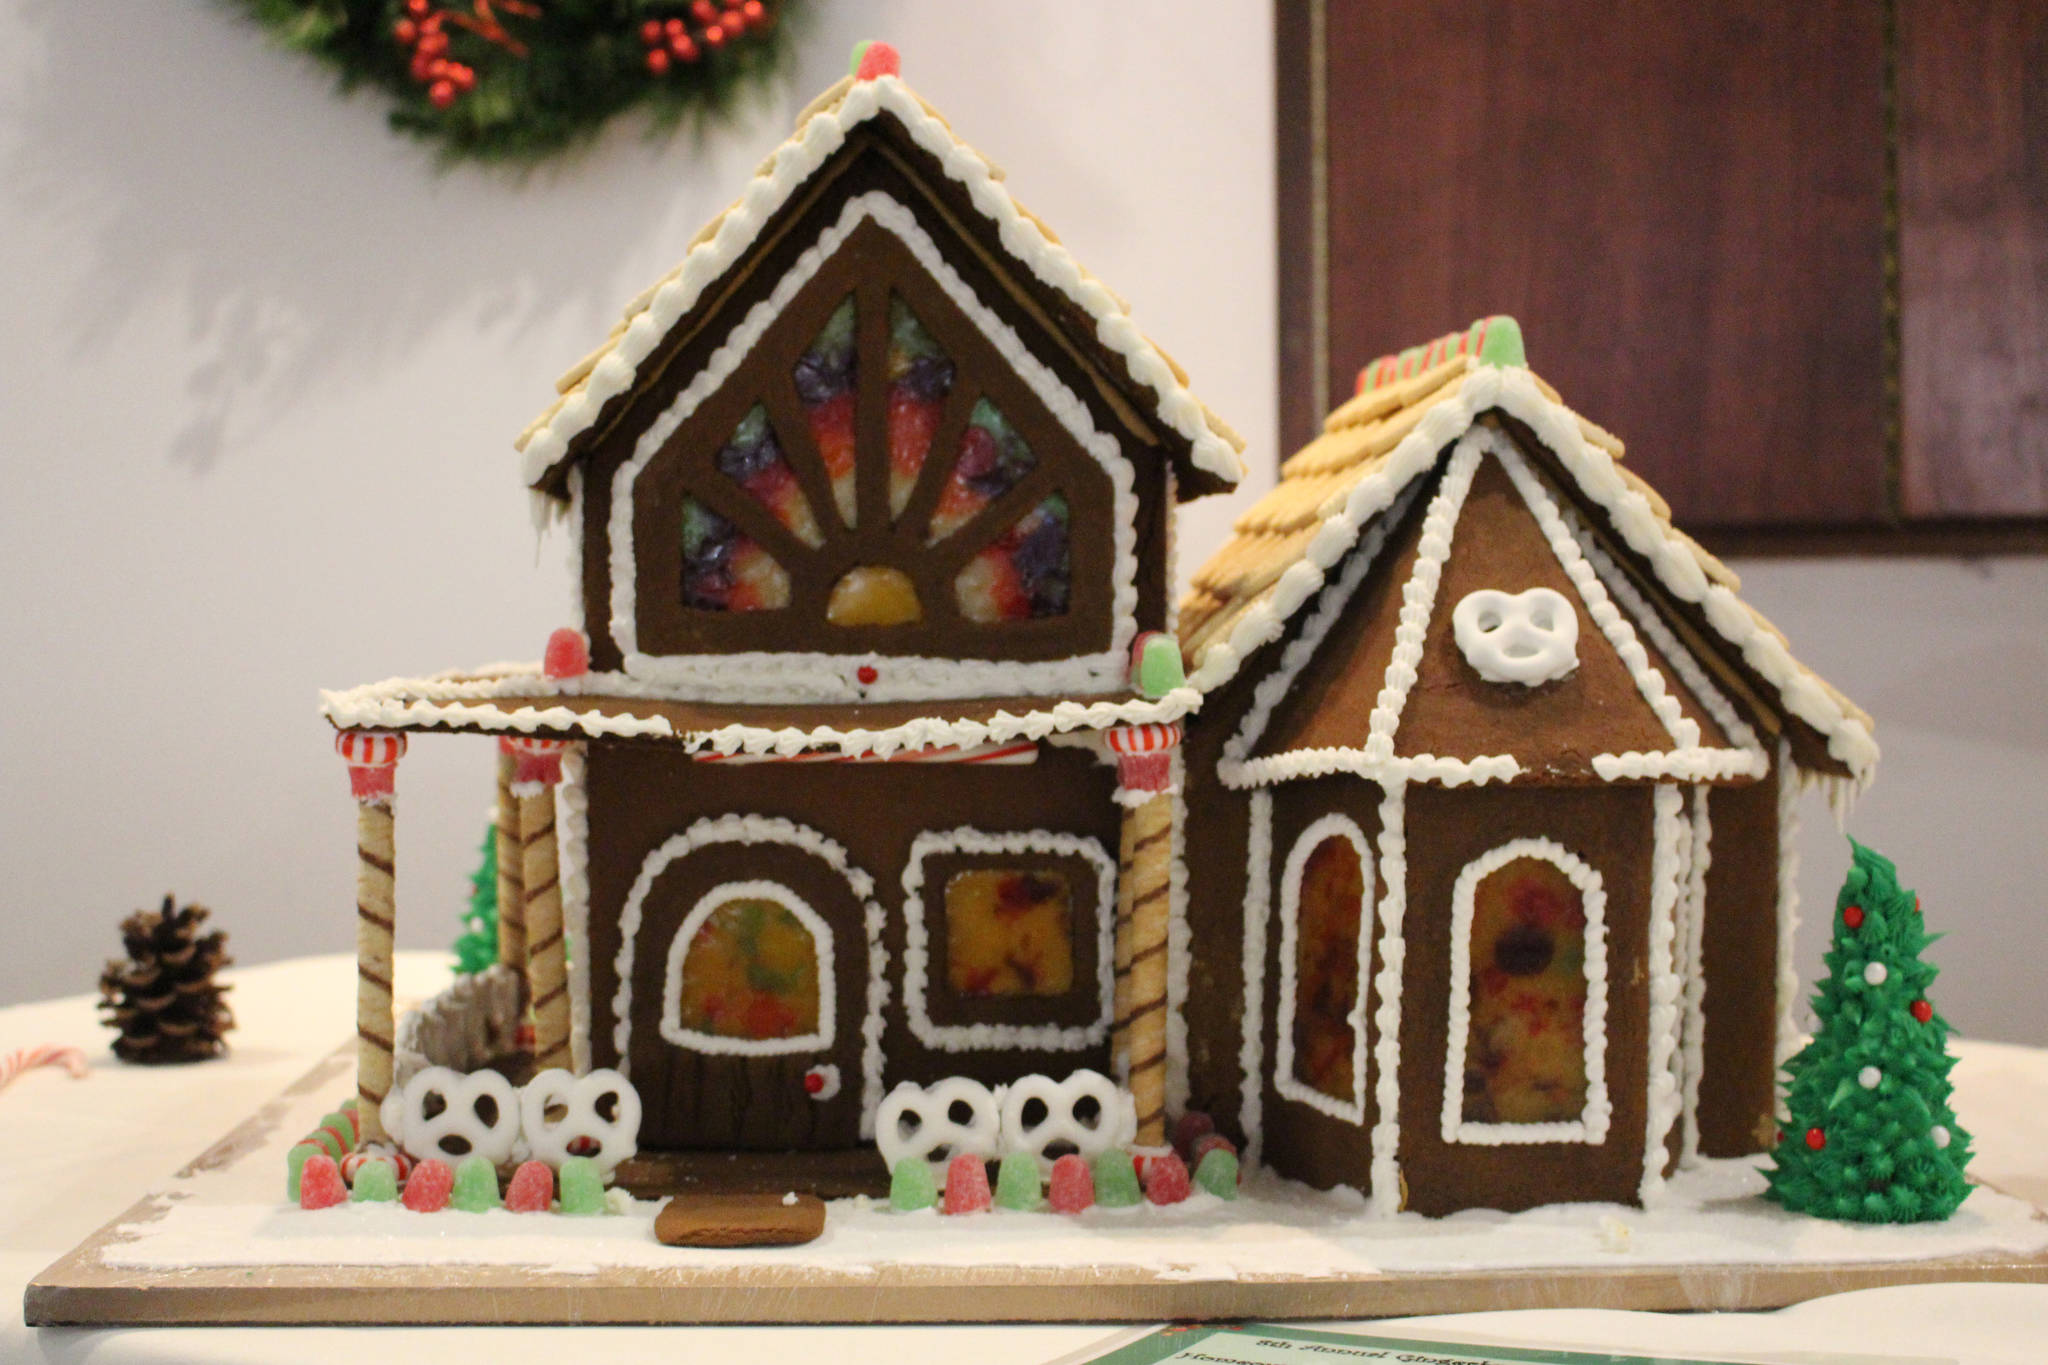 A gingerbread house created by residents of Charis Place Assisted Living is seen on display at the Kenai Visitors and Cultural Center on Dec. 8, 2020. (Photo by Brian Mazurek/Peninsula Clarion)